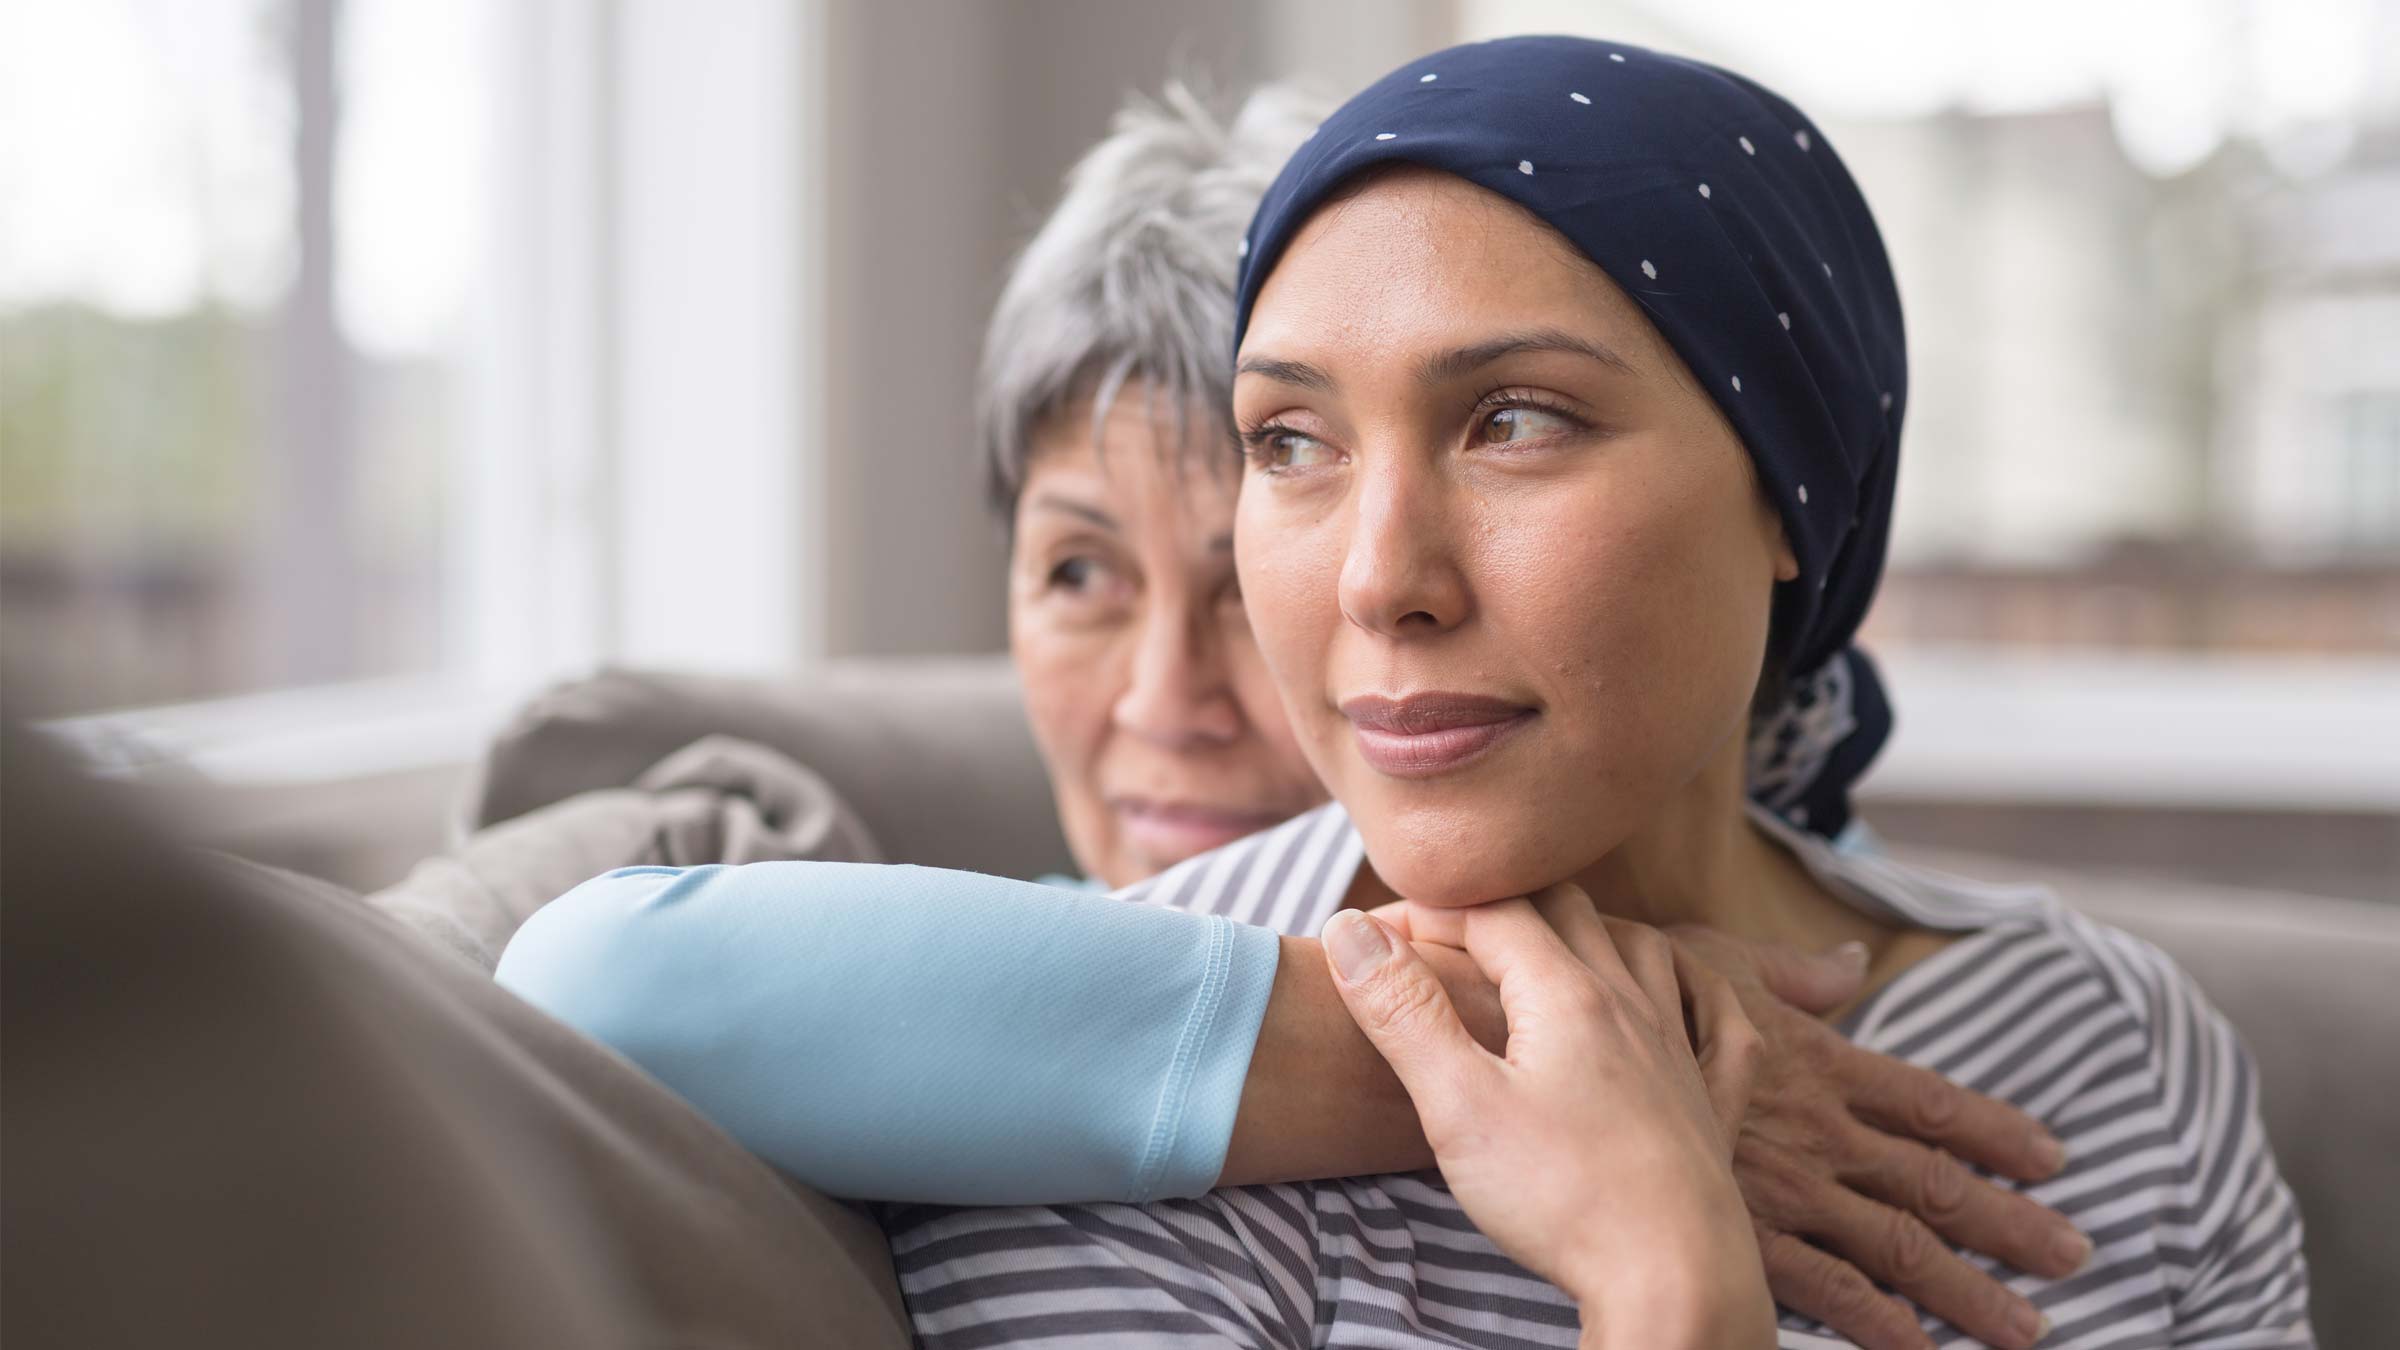 Woman wearing headscarf sits on the couch with older woman